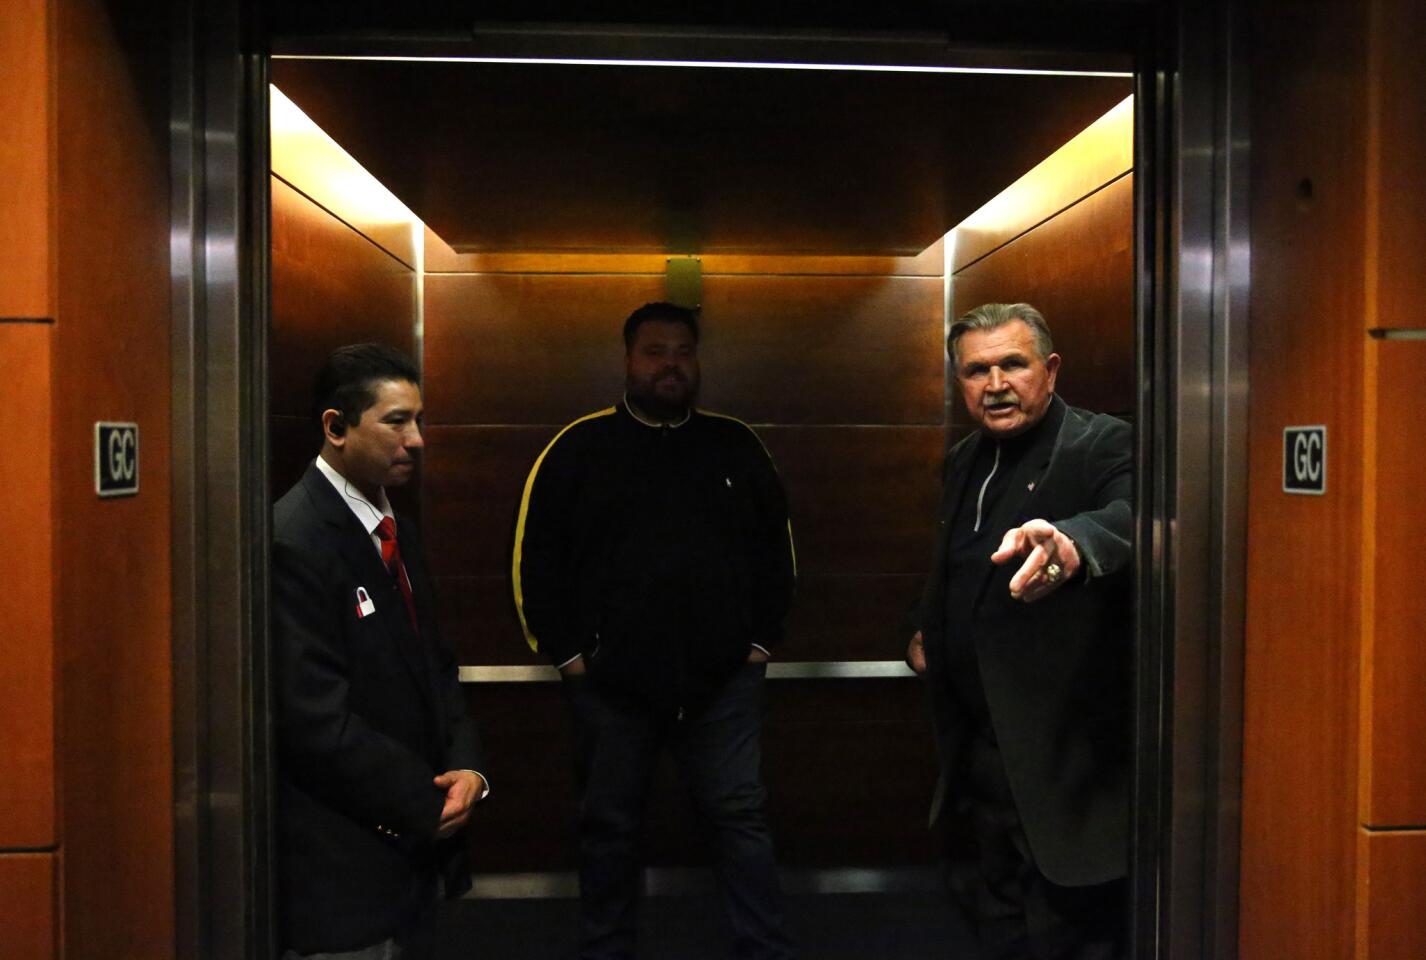 Mike Ditka hops in an elevator as members of the 1985 Chicago Bears arrive at Soldier Field for a reunion to celebrate the 30th anniversary of their Super Bowl victory. The event took place on Tuesday, Jan. 26, 2016.